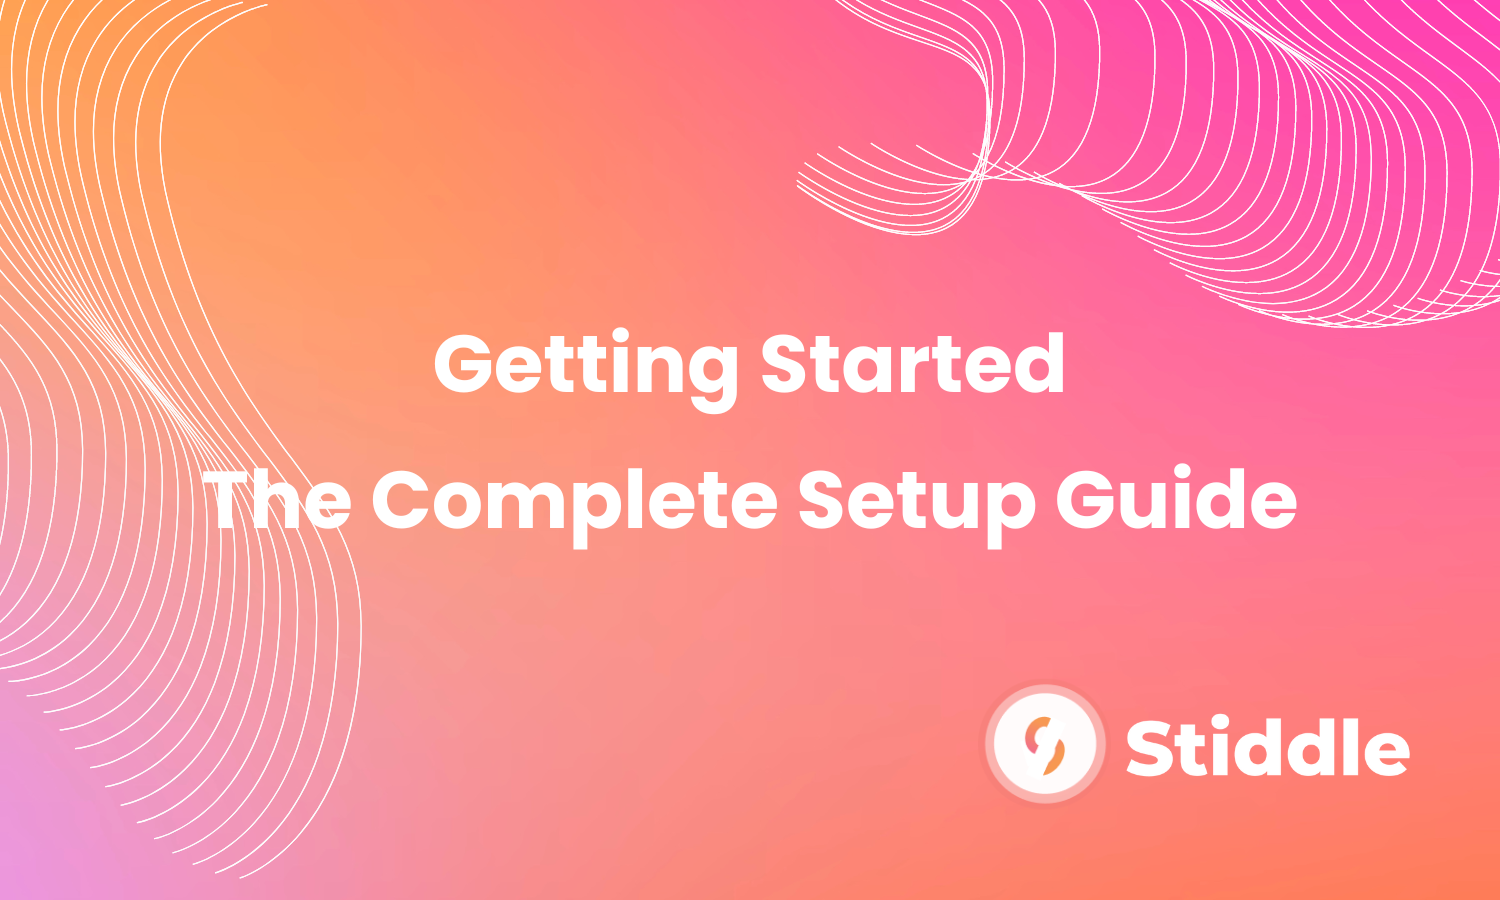 Getting Started with Stiddle